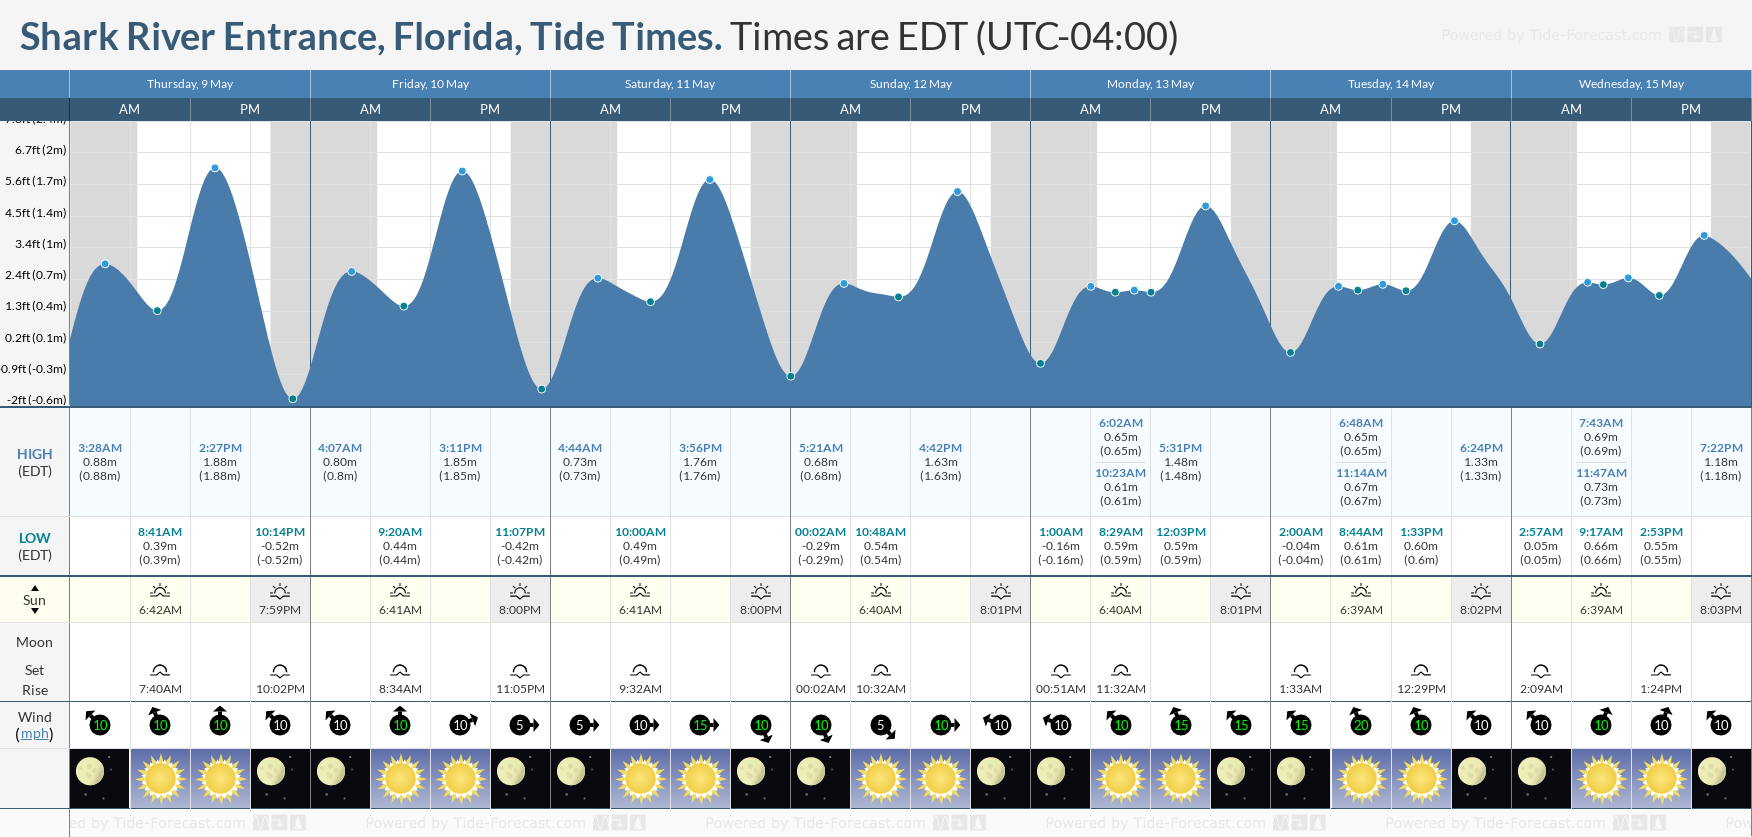 Shark River Entrance, Florida Tide Chart including high and low tide tide times for the next 7 days